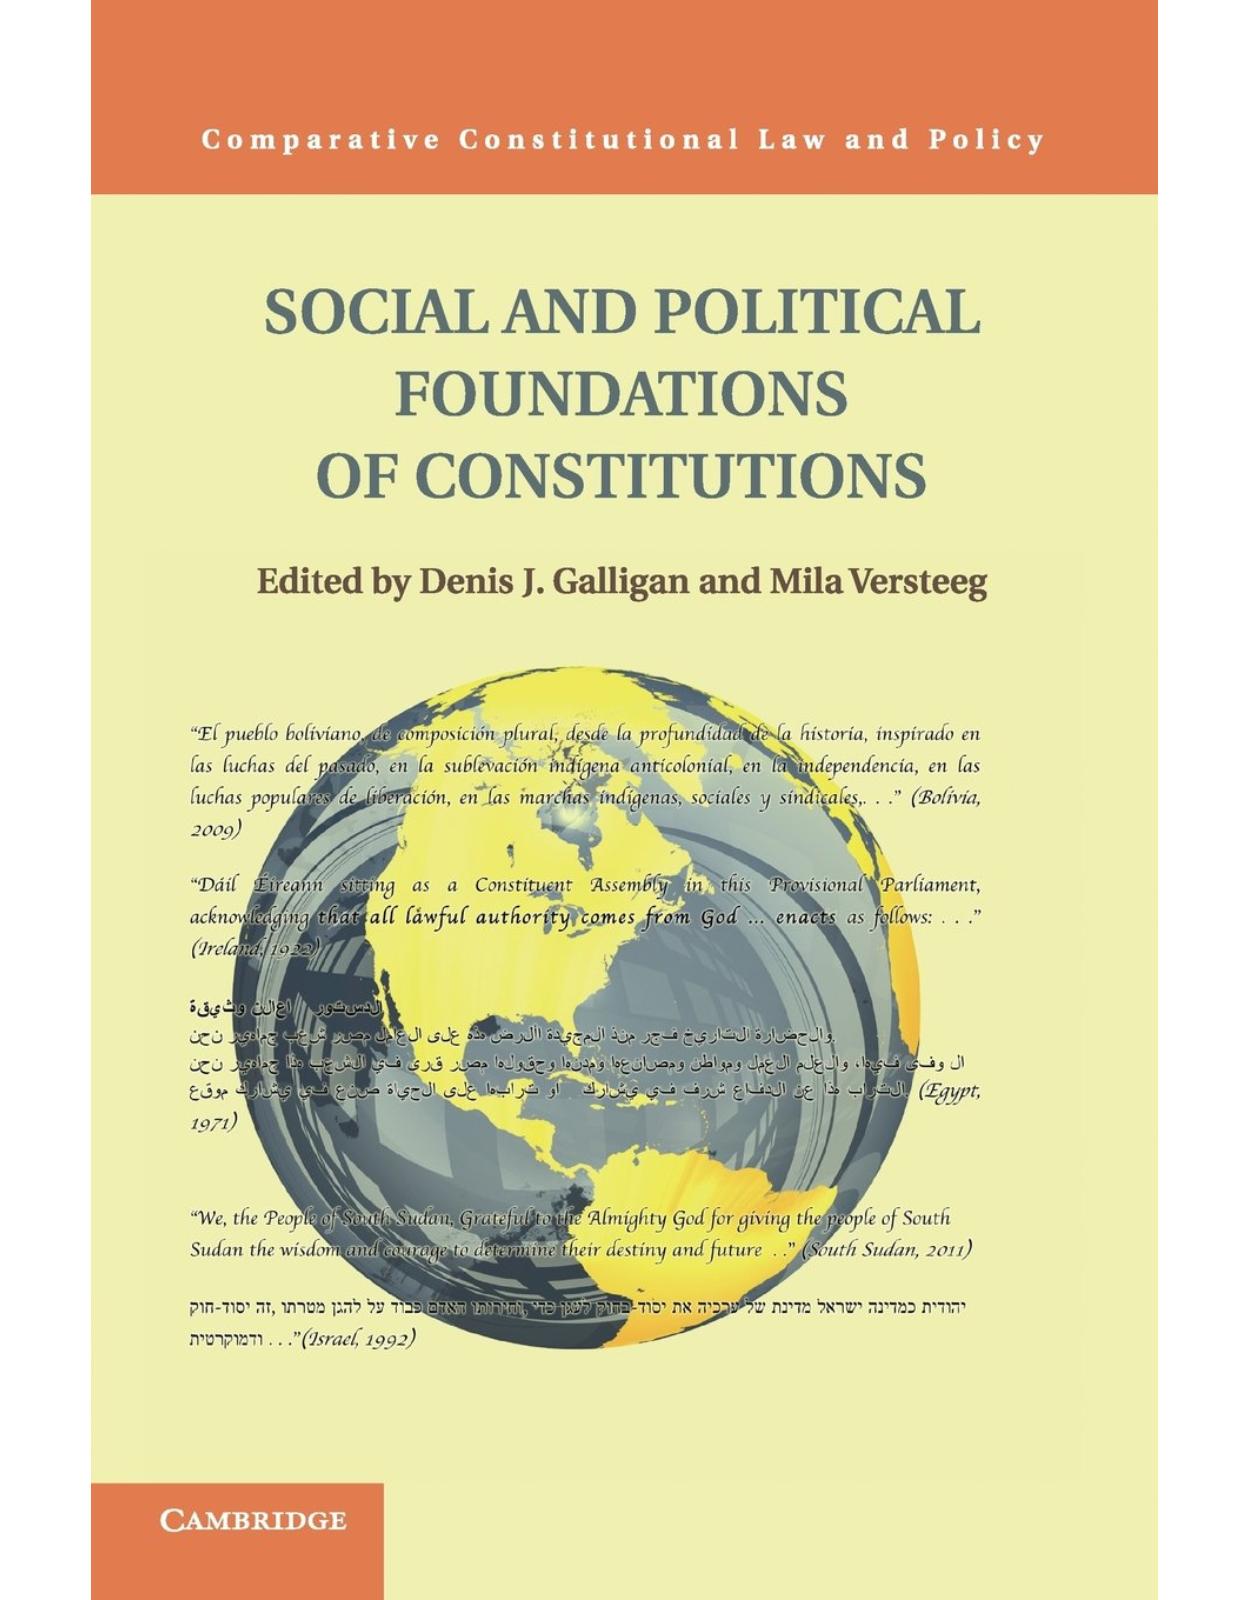 Social and Political Foundations of Constitutions (Comparative Constitutional Law and Policy)